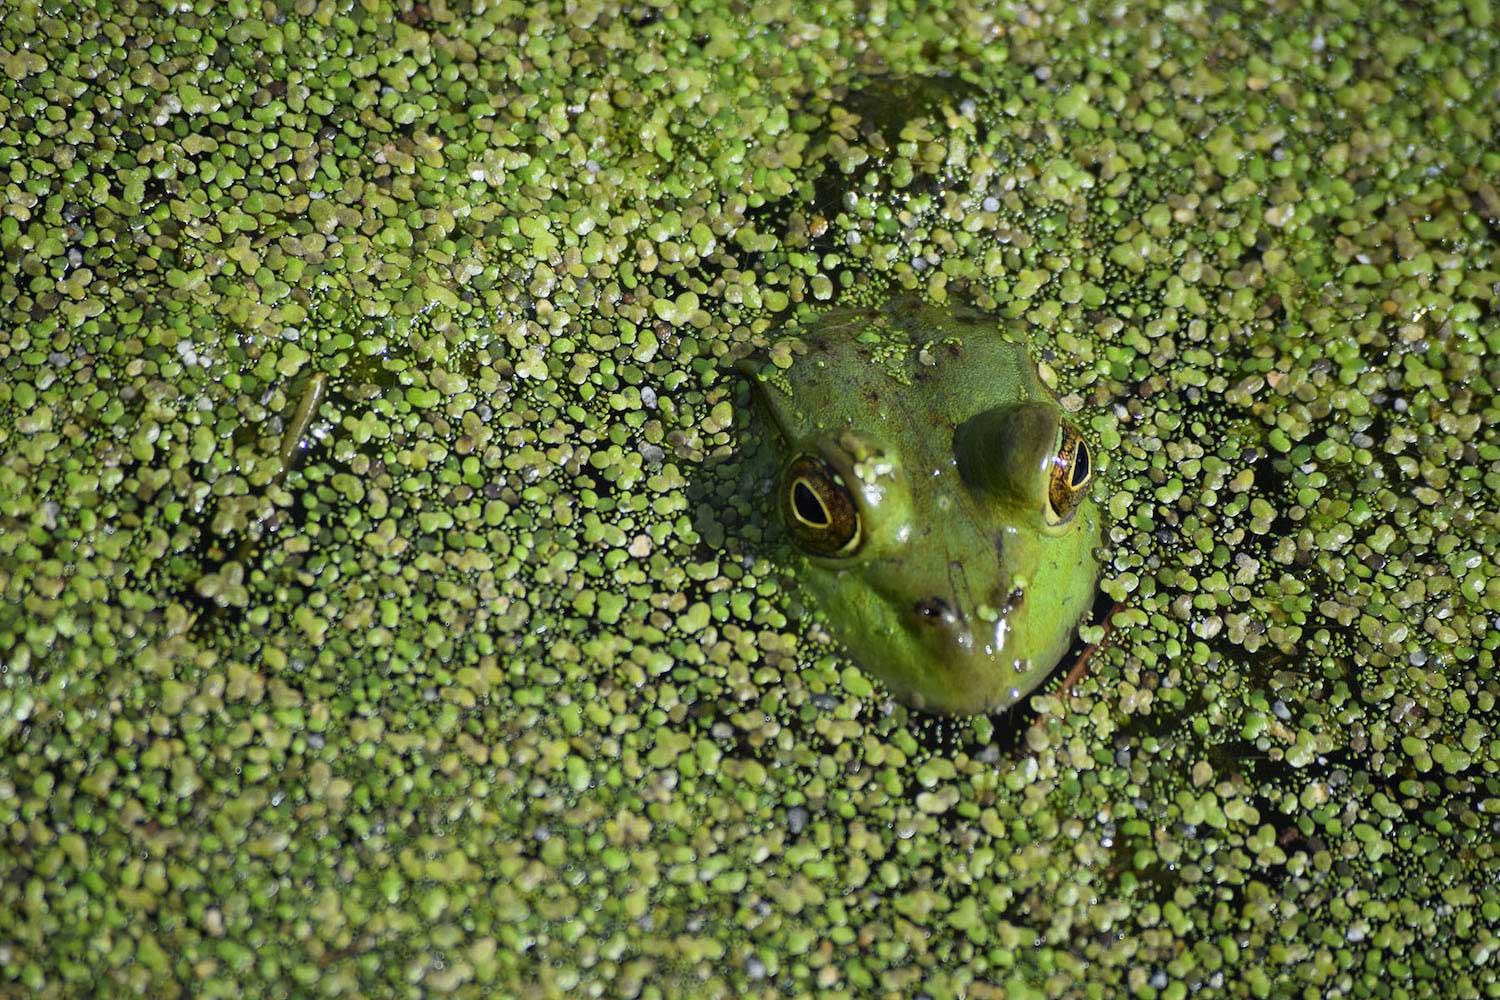 A frog emerging its head from water covered in duckweed.